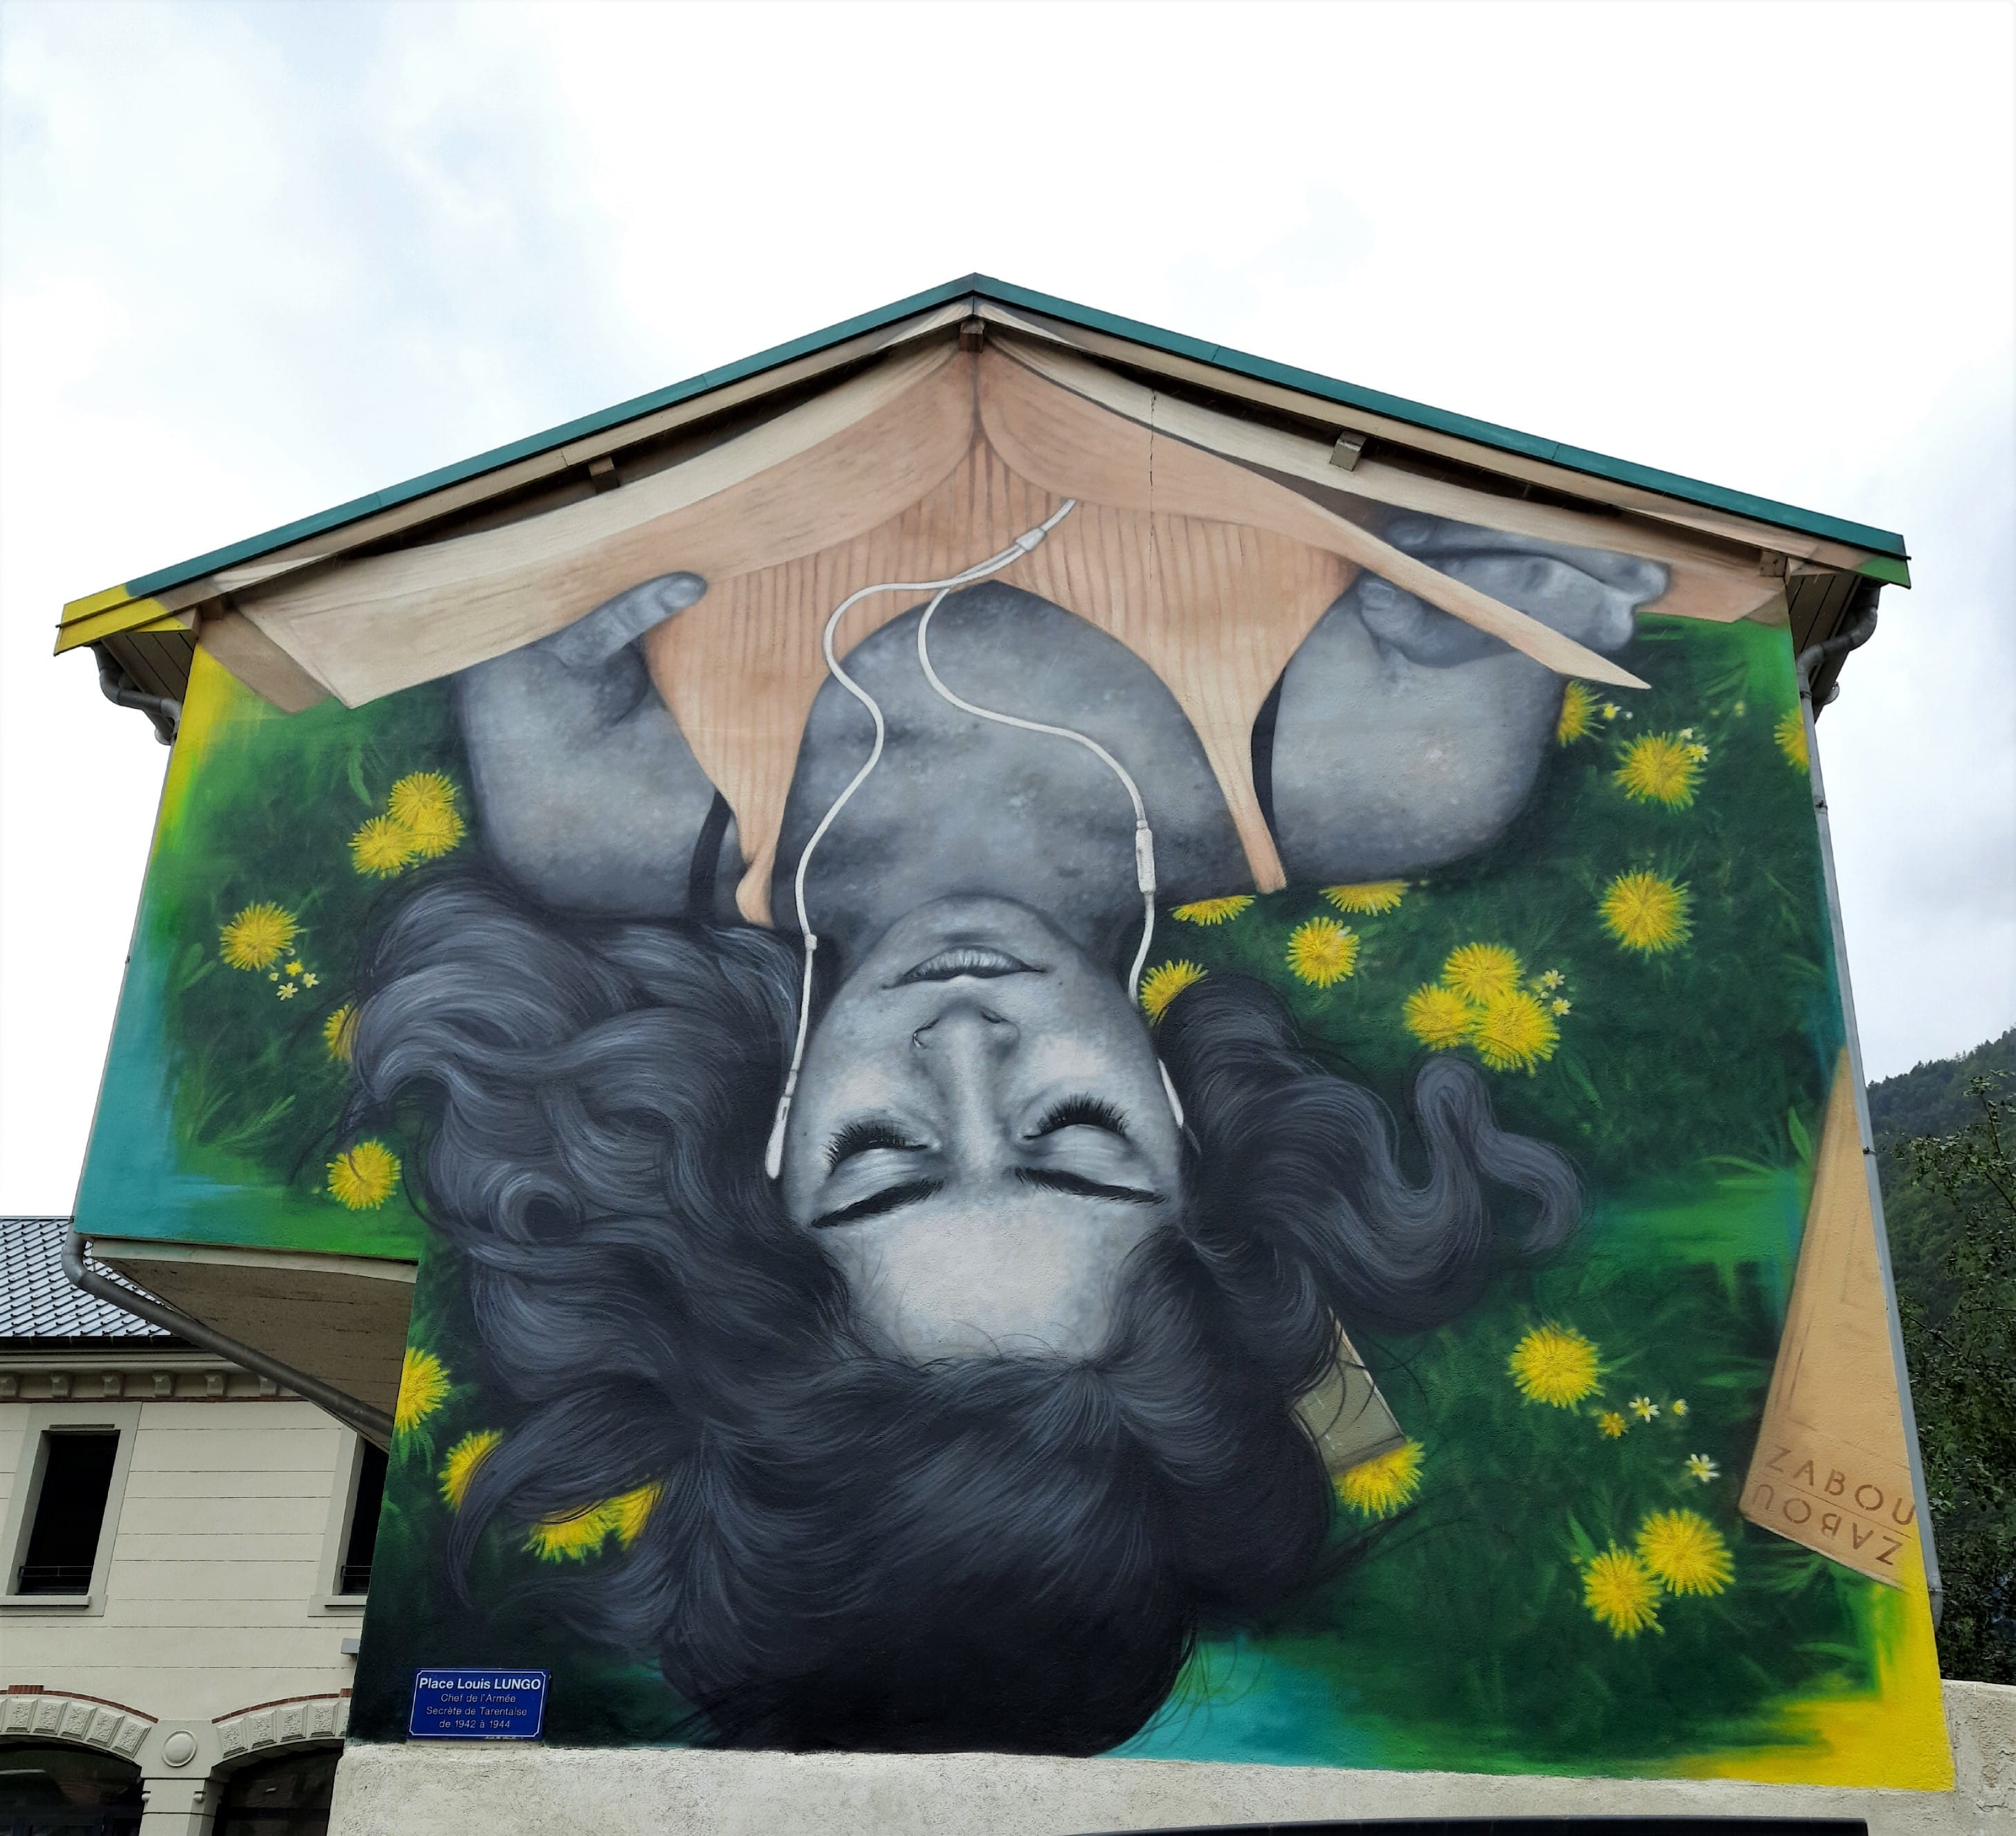 Graffiti 6498  by the artist ZABOU captured by Mephisroth in Moutiers France